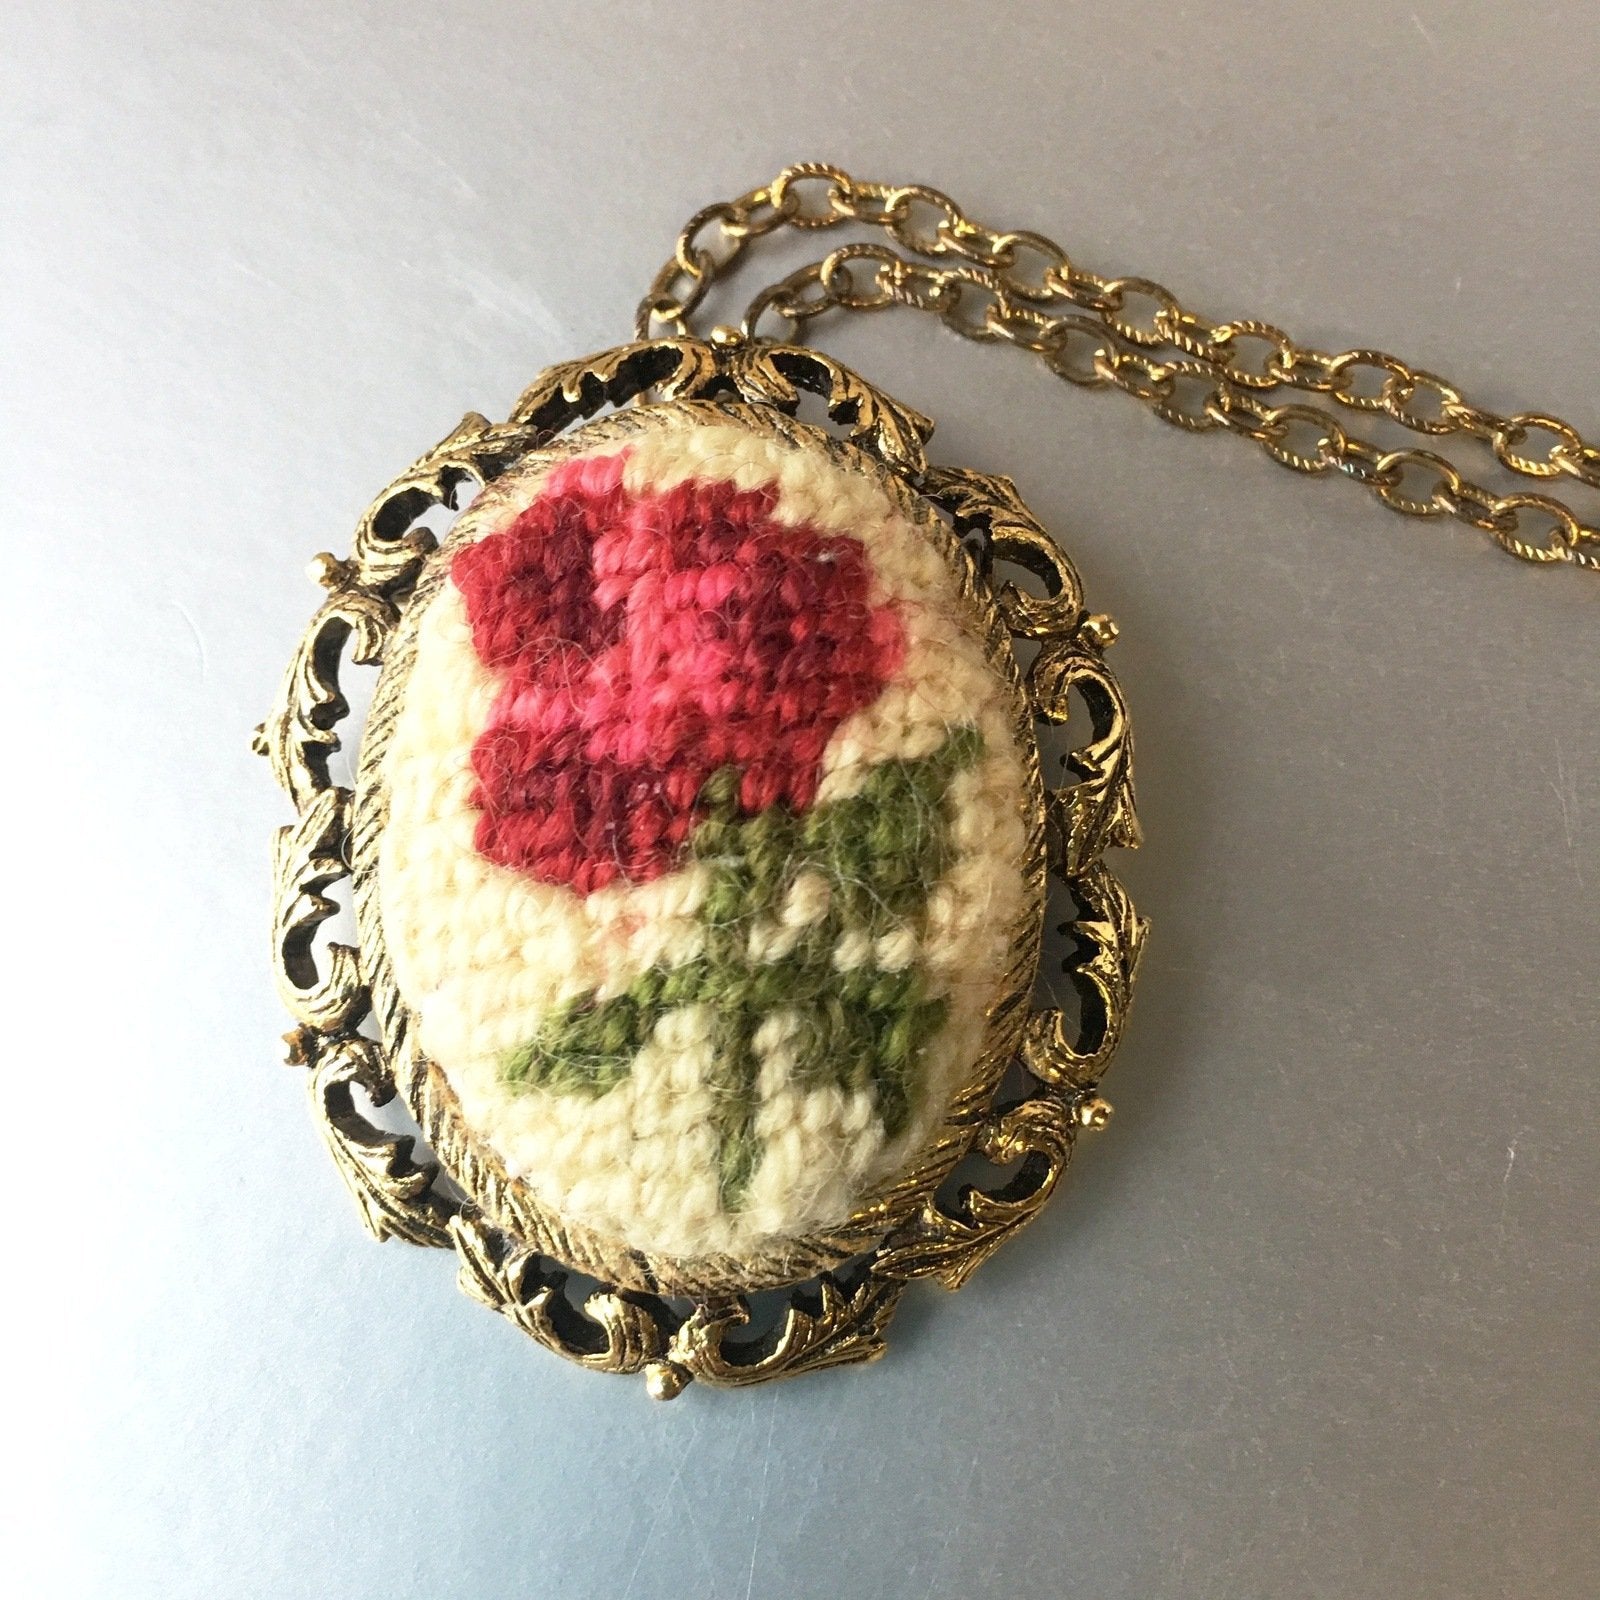 Floral Embroidered Needlepoint Brooch Pendant Chain Necklace Vintage Jewelry